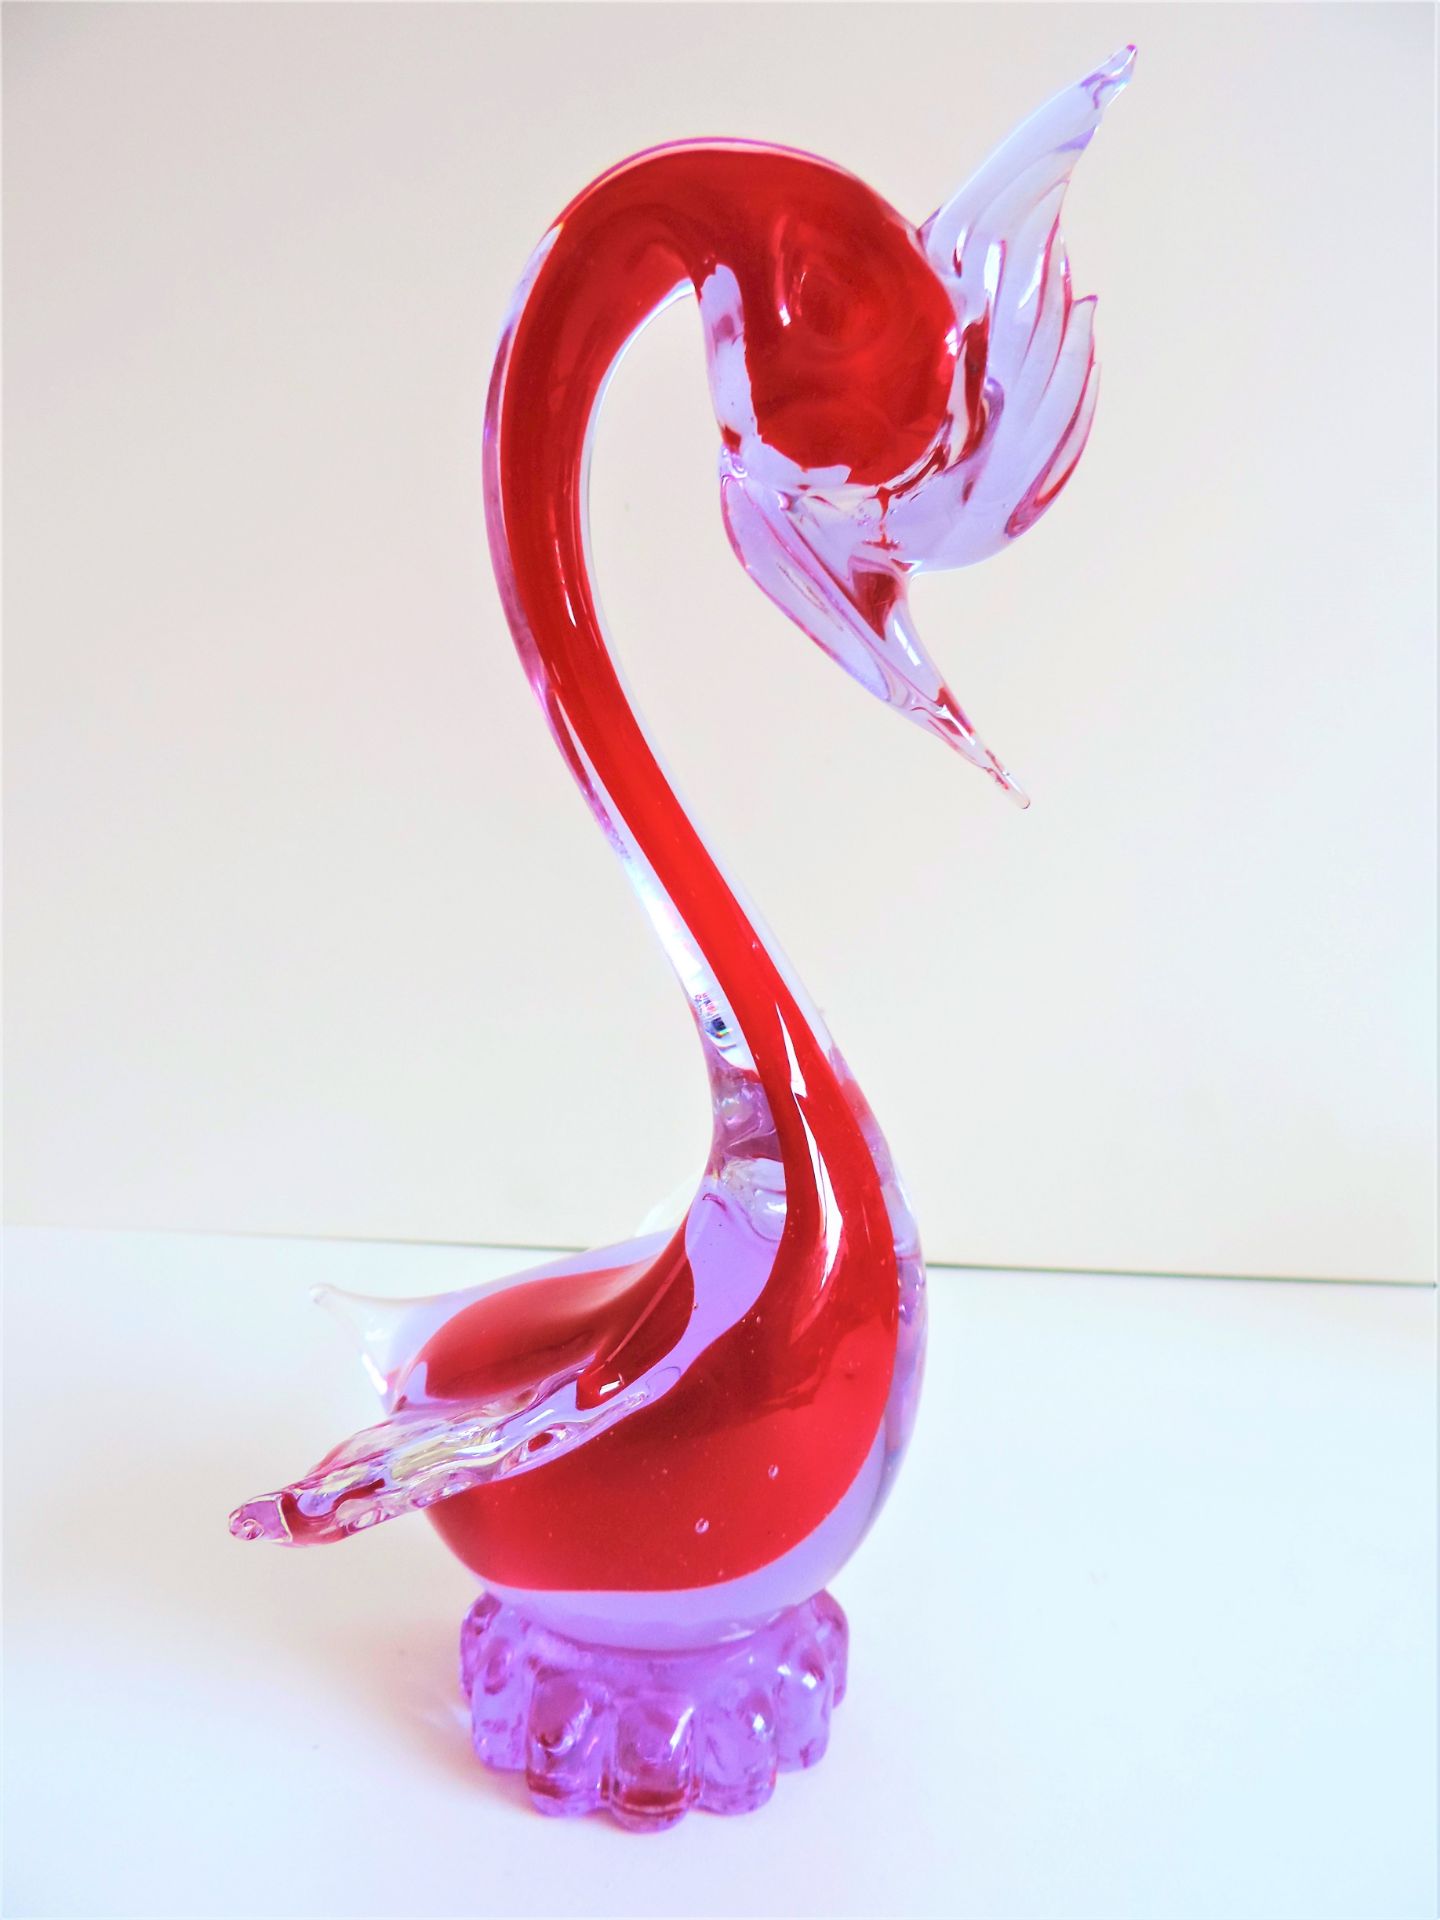 Vintage Murano Glass Sculpture - Image 2 of 4